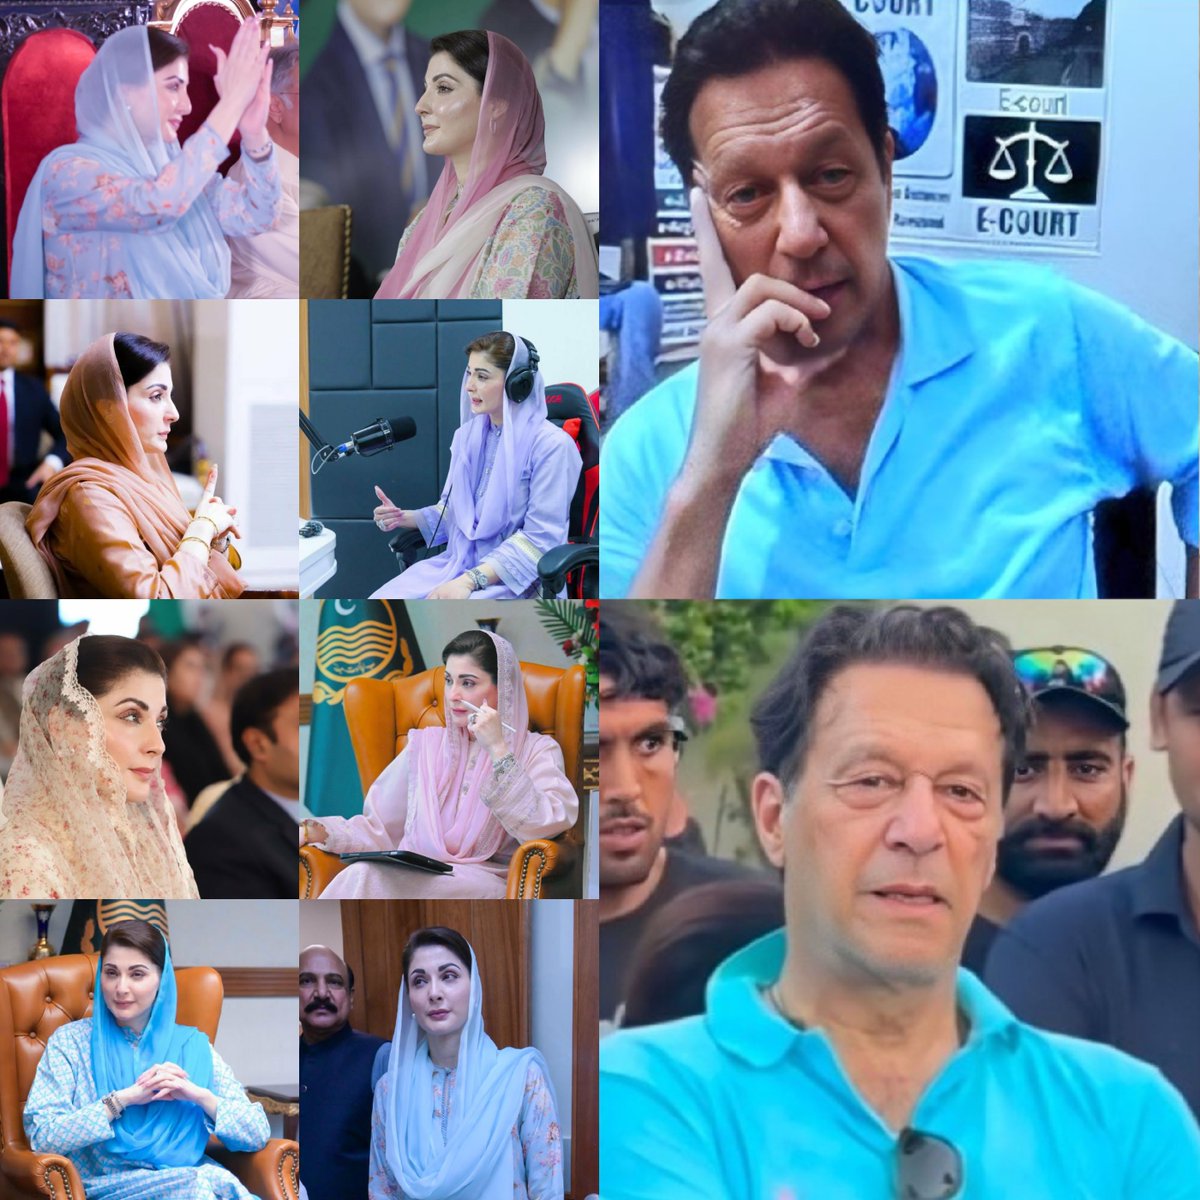 He doesn't need millions of rupees in suits, shoes, watches, or jewelry to go viral. He effortlessly became viral with a simple Sky-blue Polo shirt which he has already worn in his appearance in 2023.

Presenting the PM of Hearts, #ImranKhan 💙

#IKonVideoLink #SupremeCourt